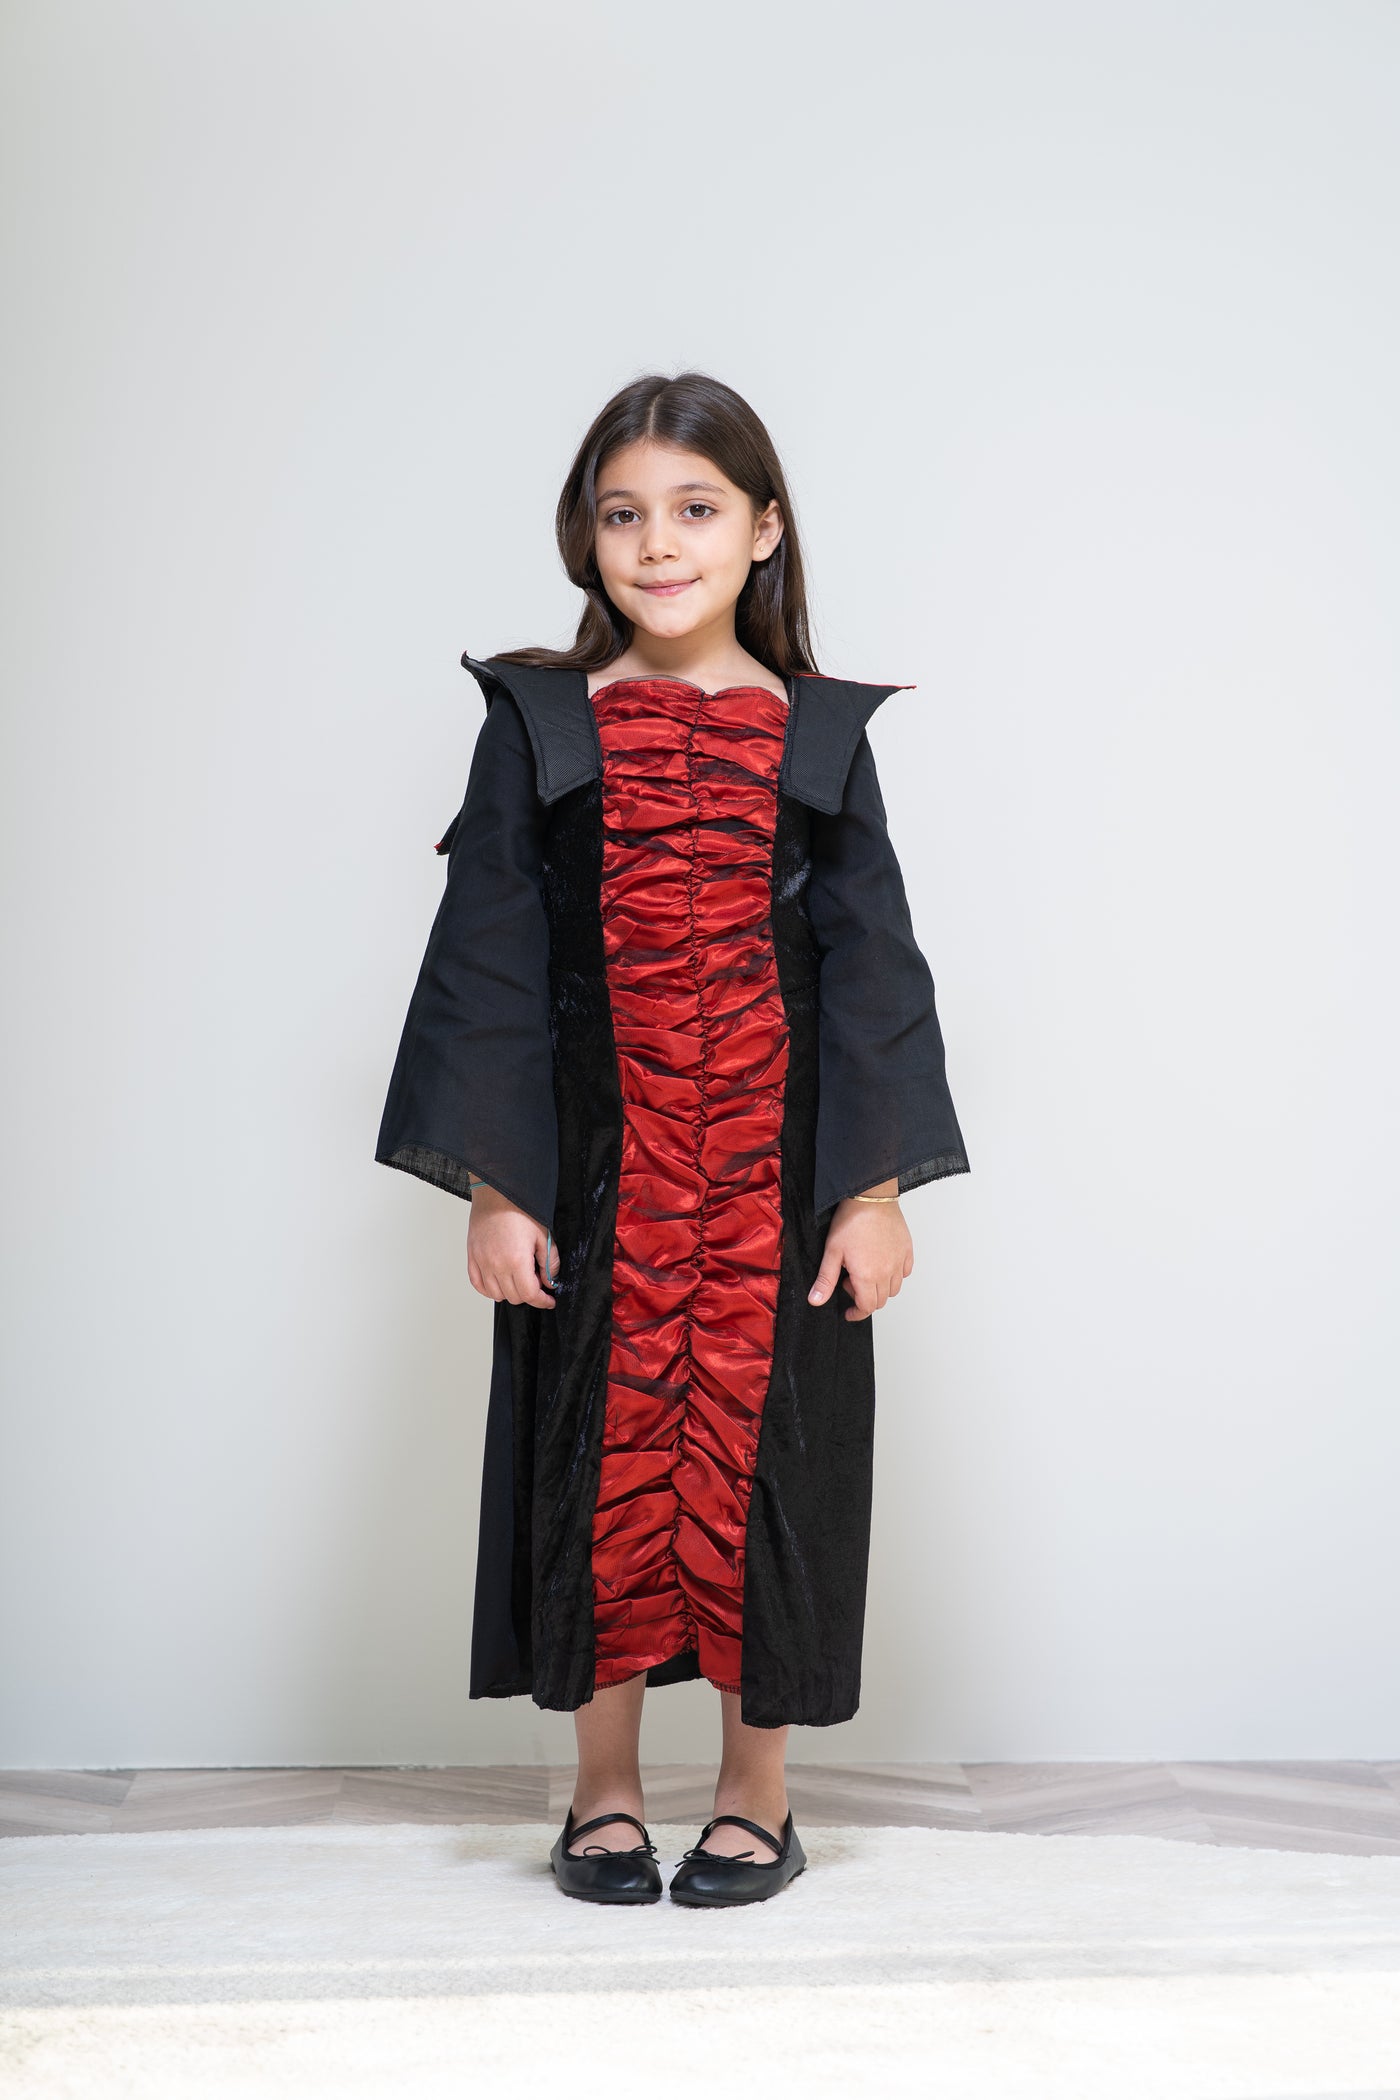 Black with red dress costume